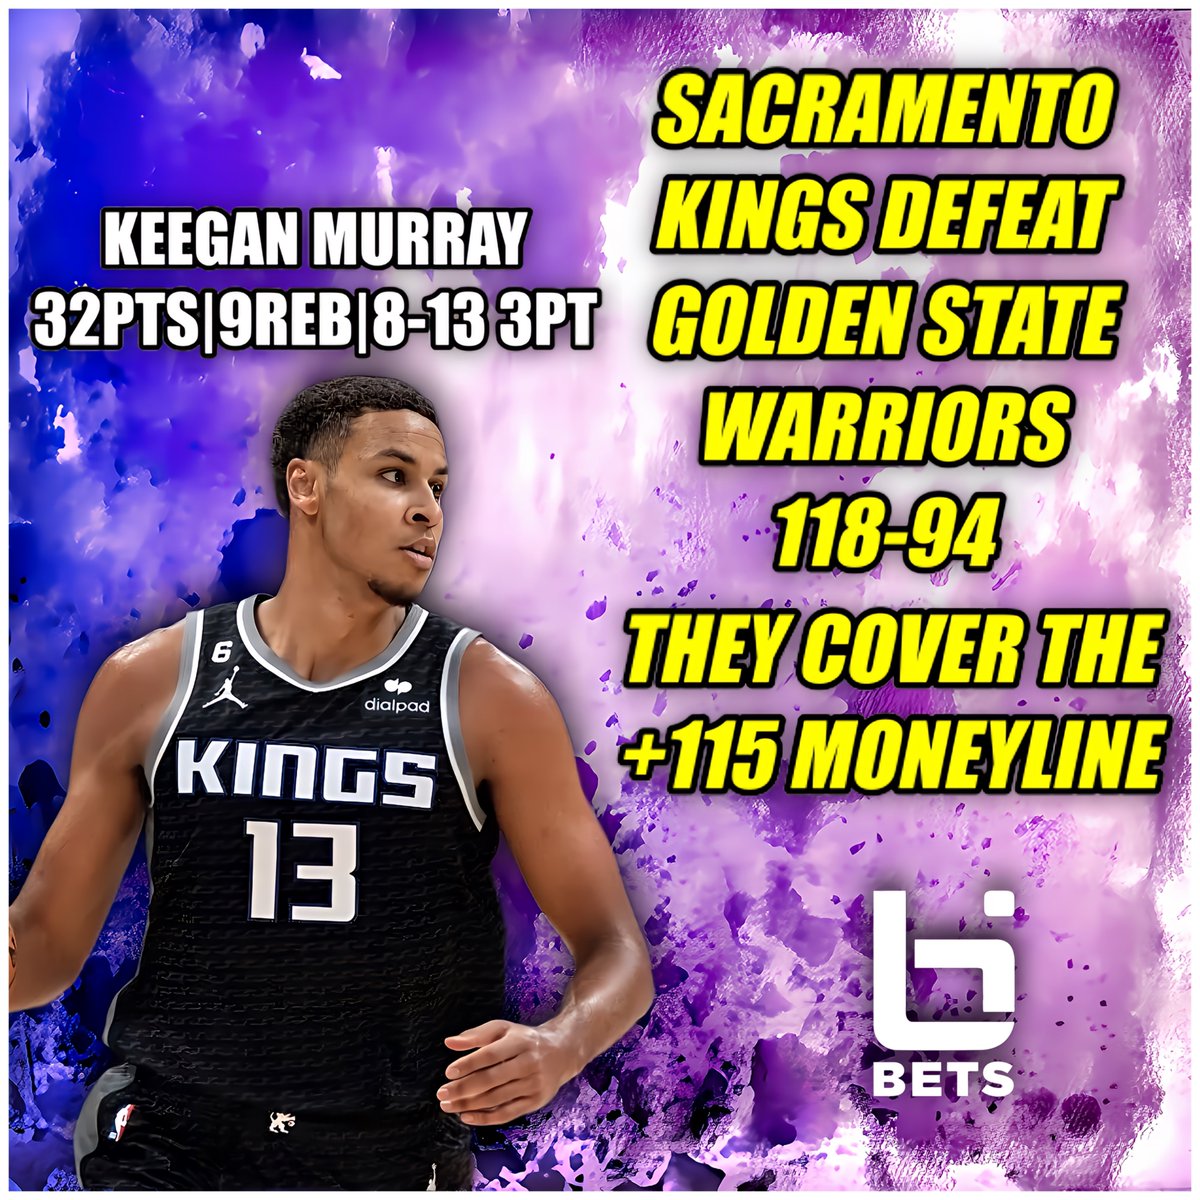 The Sacramento Kings get their revenge against the Warriors as +115 ML underdogs 👀 They are moving on to play the Pelicans #NBAPlayINTournament